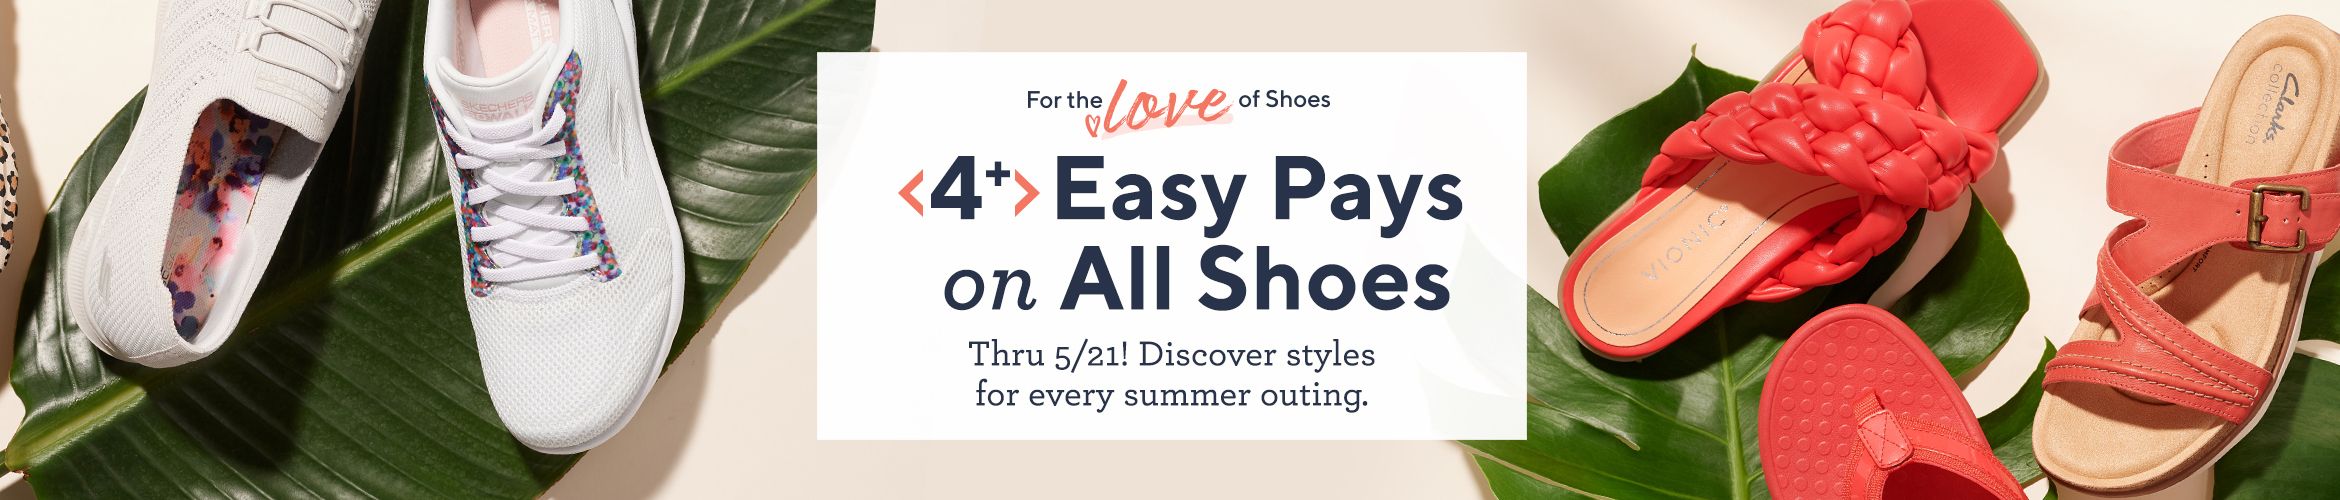 For the Love of Shoes: 4+ Easy Pays on All Shoes Thru 5/21! Discover styles for every summer outing.